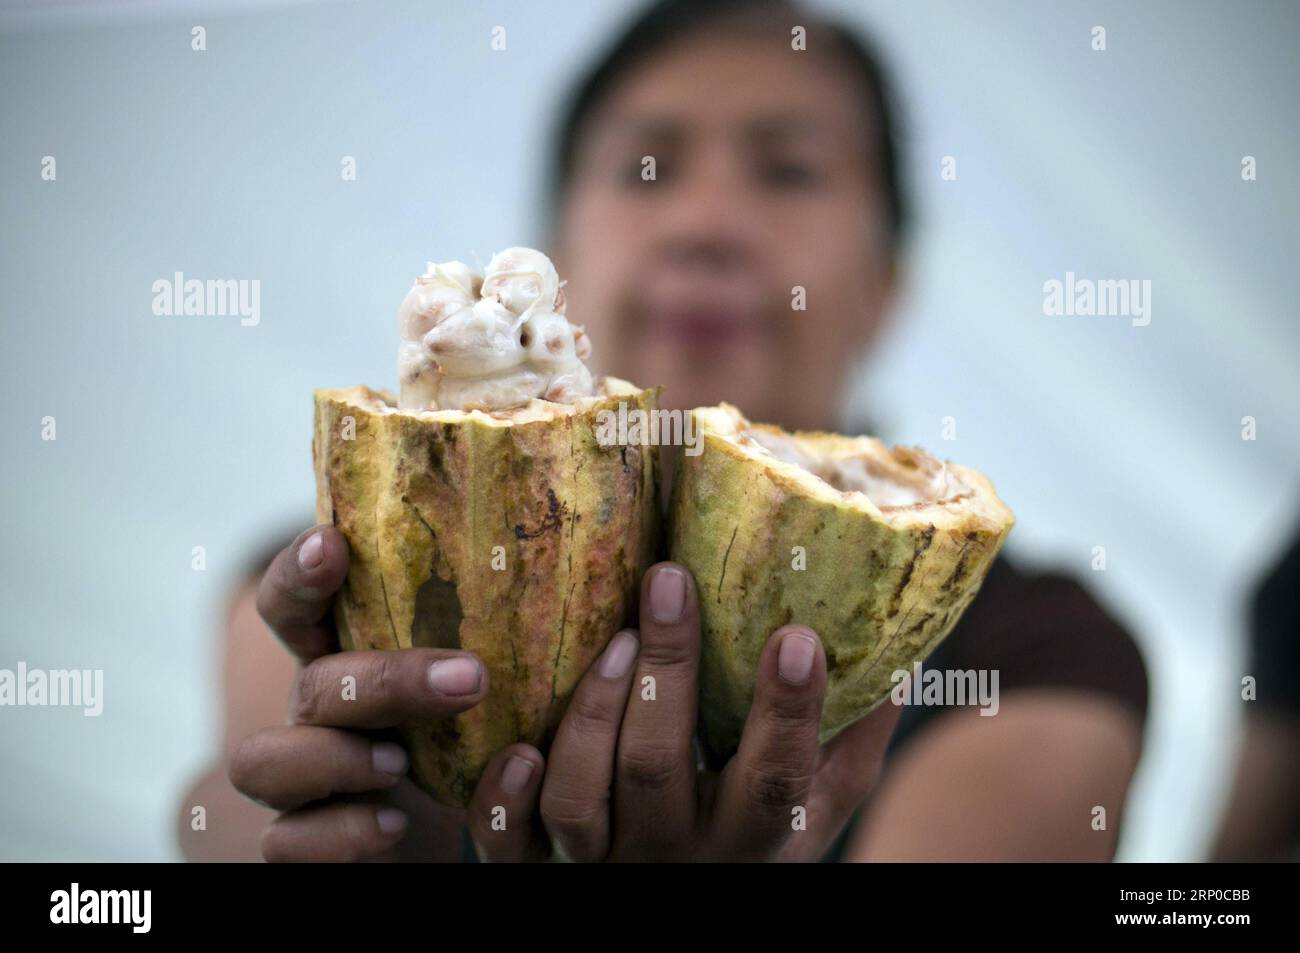 (180505) -- MEXICO CITY, May 5, 2018 -- Photo taken on May 4, 2018 shows a woman presenting cacao from Tabasco during the 2018 Chocolate and Cocoa Artisan Festival, in Mexico City, capital of Mexico.) (jg) (rtg) (wtc) MEXICO-MEXICO CITY-CHOCOLATE AND COCOA FESTIVAL AlejandroxAyala PUBLICATIONxNOTxINxCHN Stock Photo